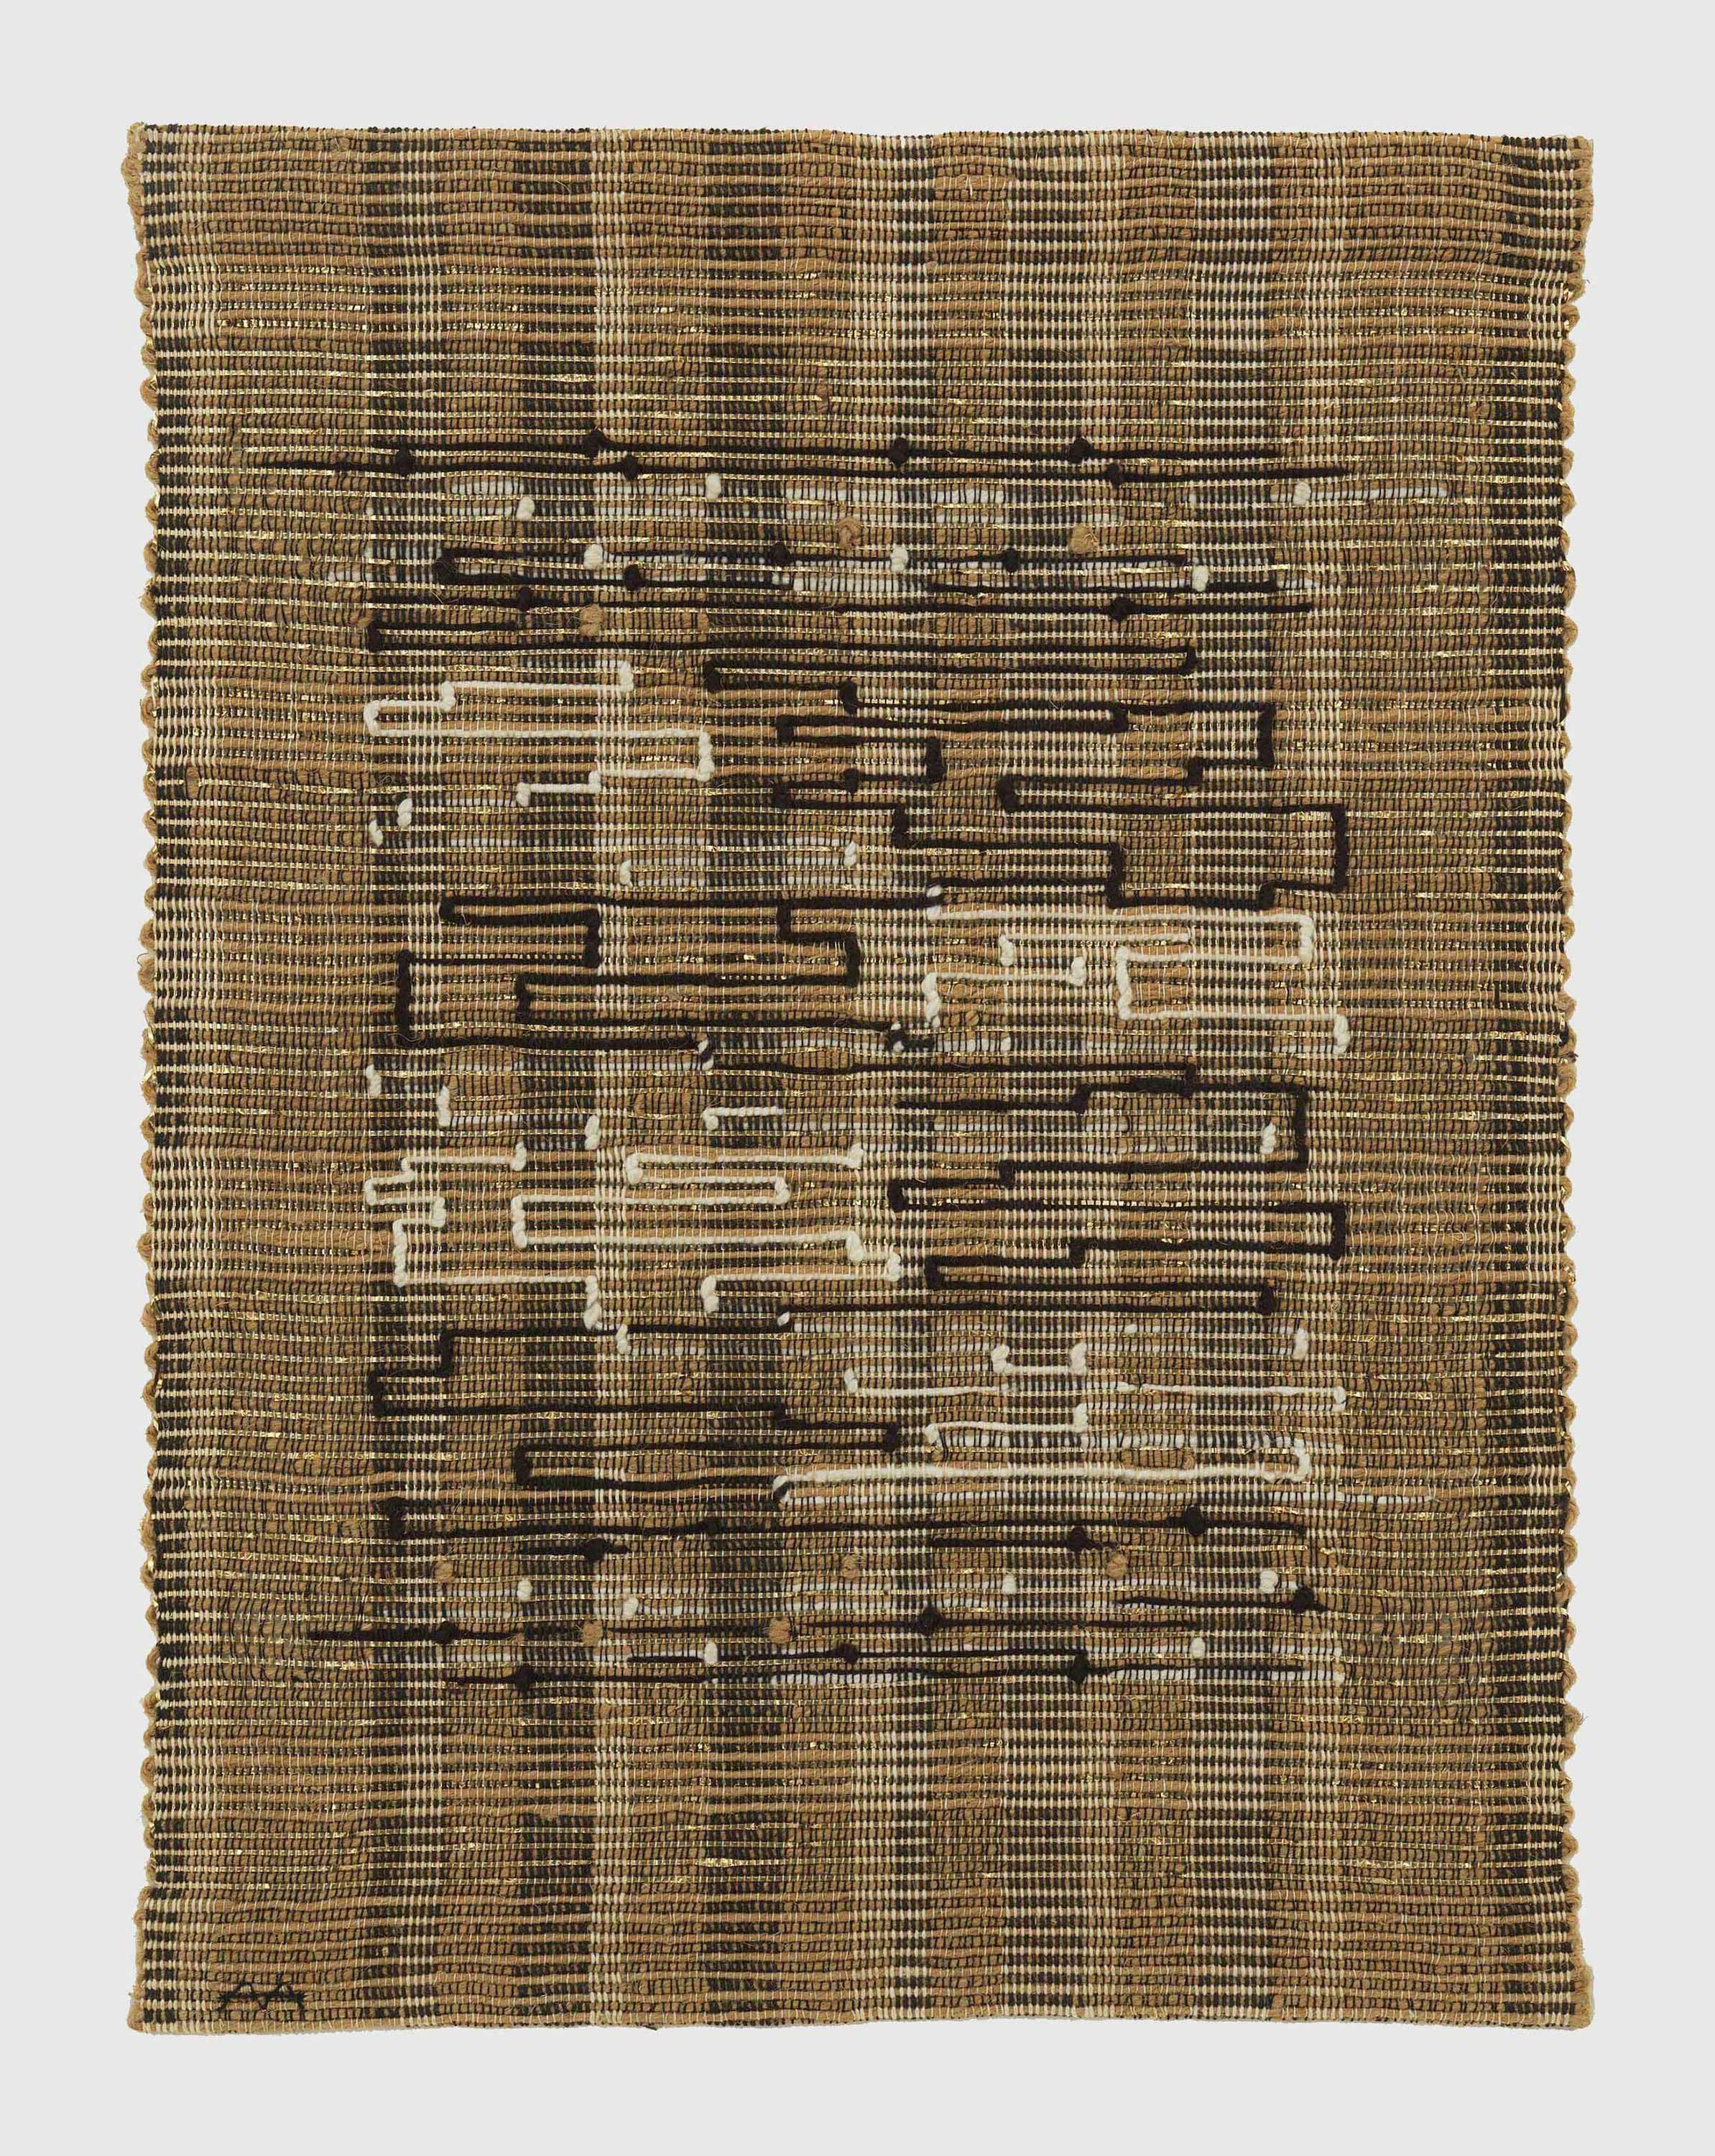 A textile by Anni Albers, titled Black-White-Gold 1, dated 1950.